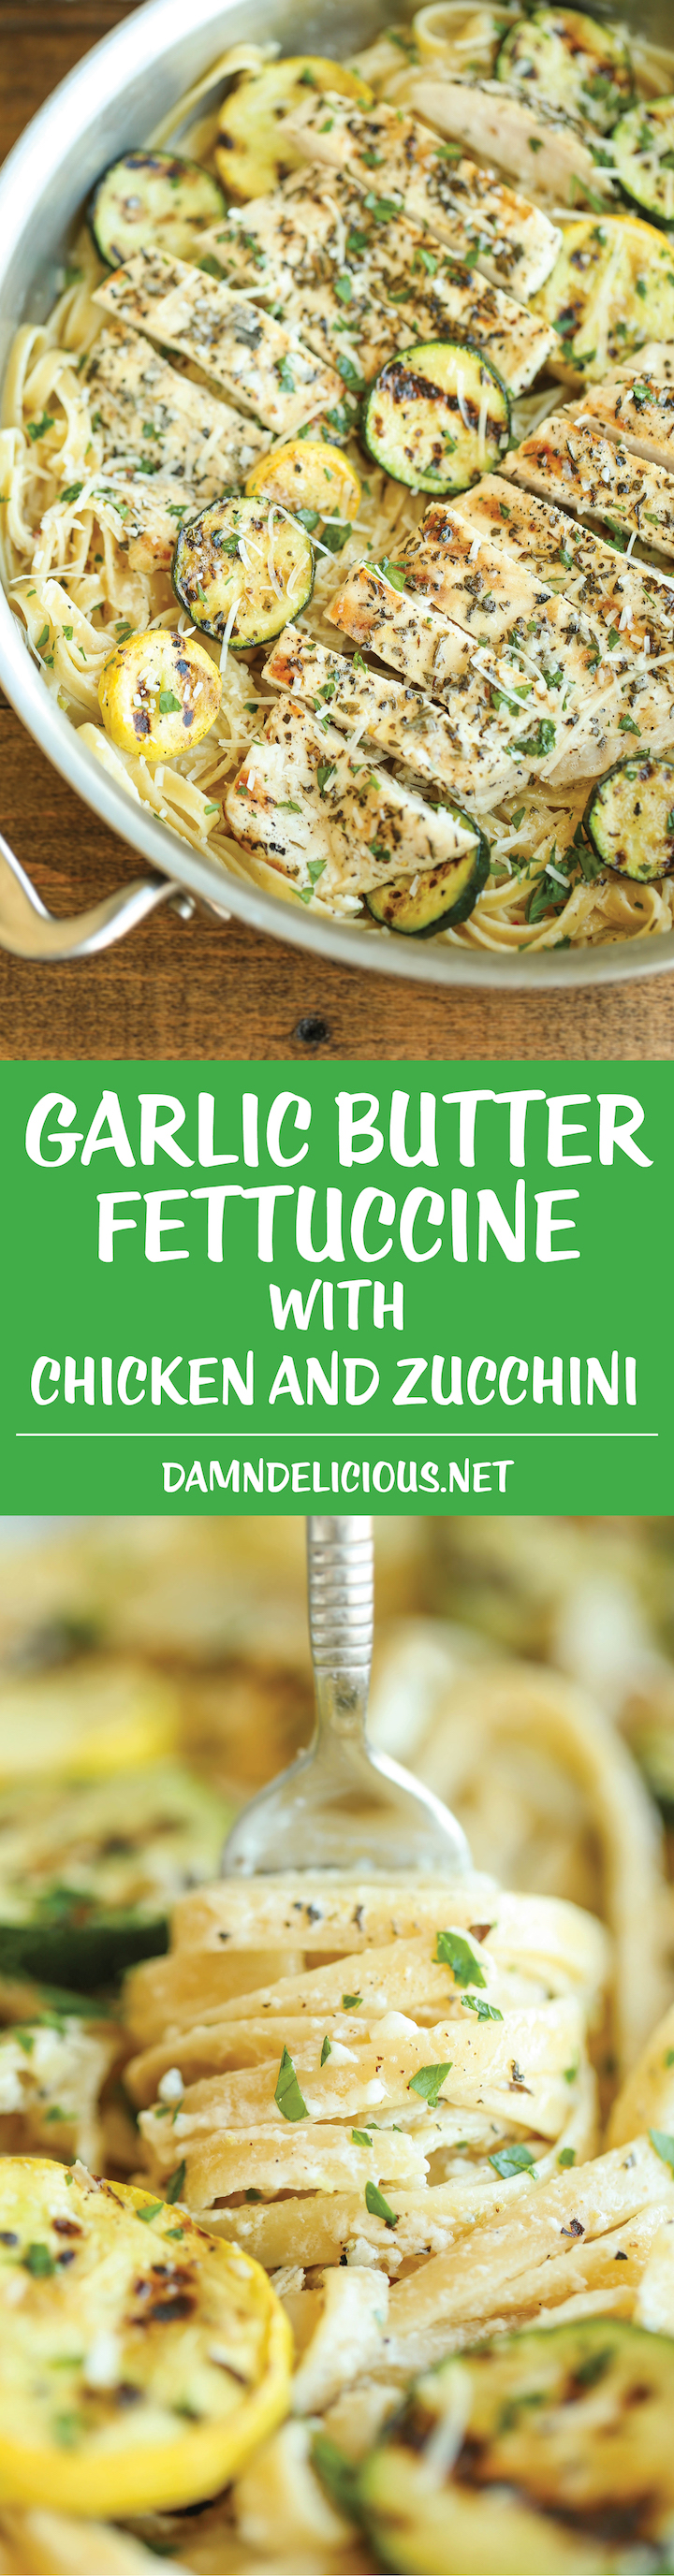 Garlic Butter Fettuccine with Chicken and Zucchini - So buttery, so garlicky, and just so creamy! Made with lemon-herb chicken and crisp-tender zucchini.